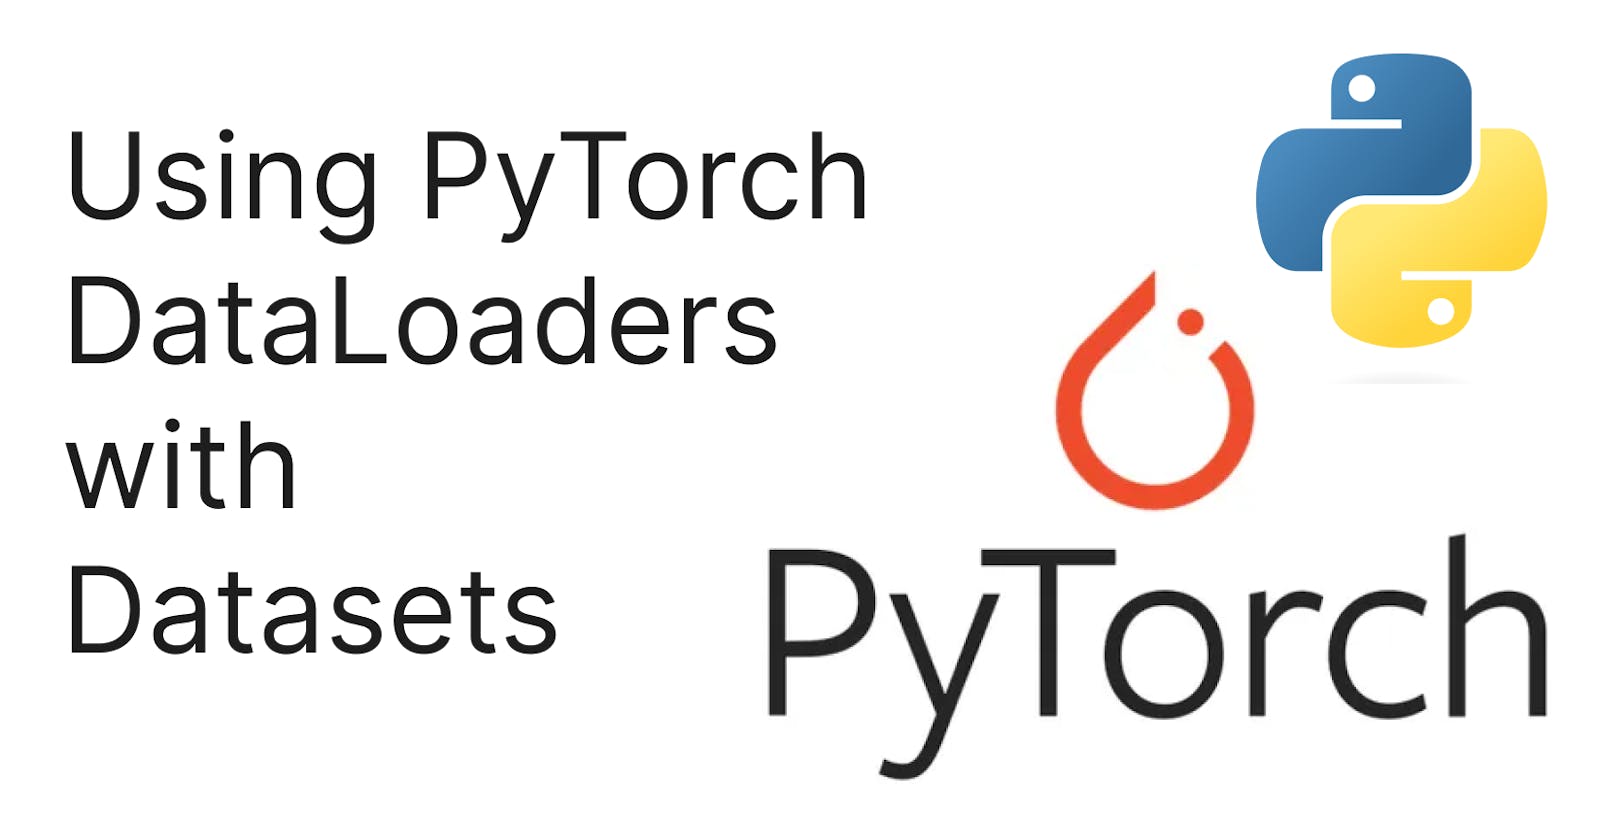 Using PyTorch DataLoaders with Datasets